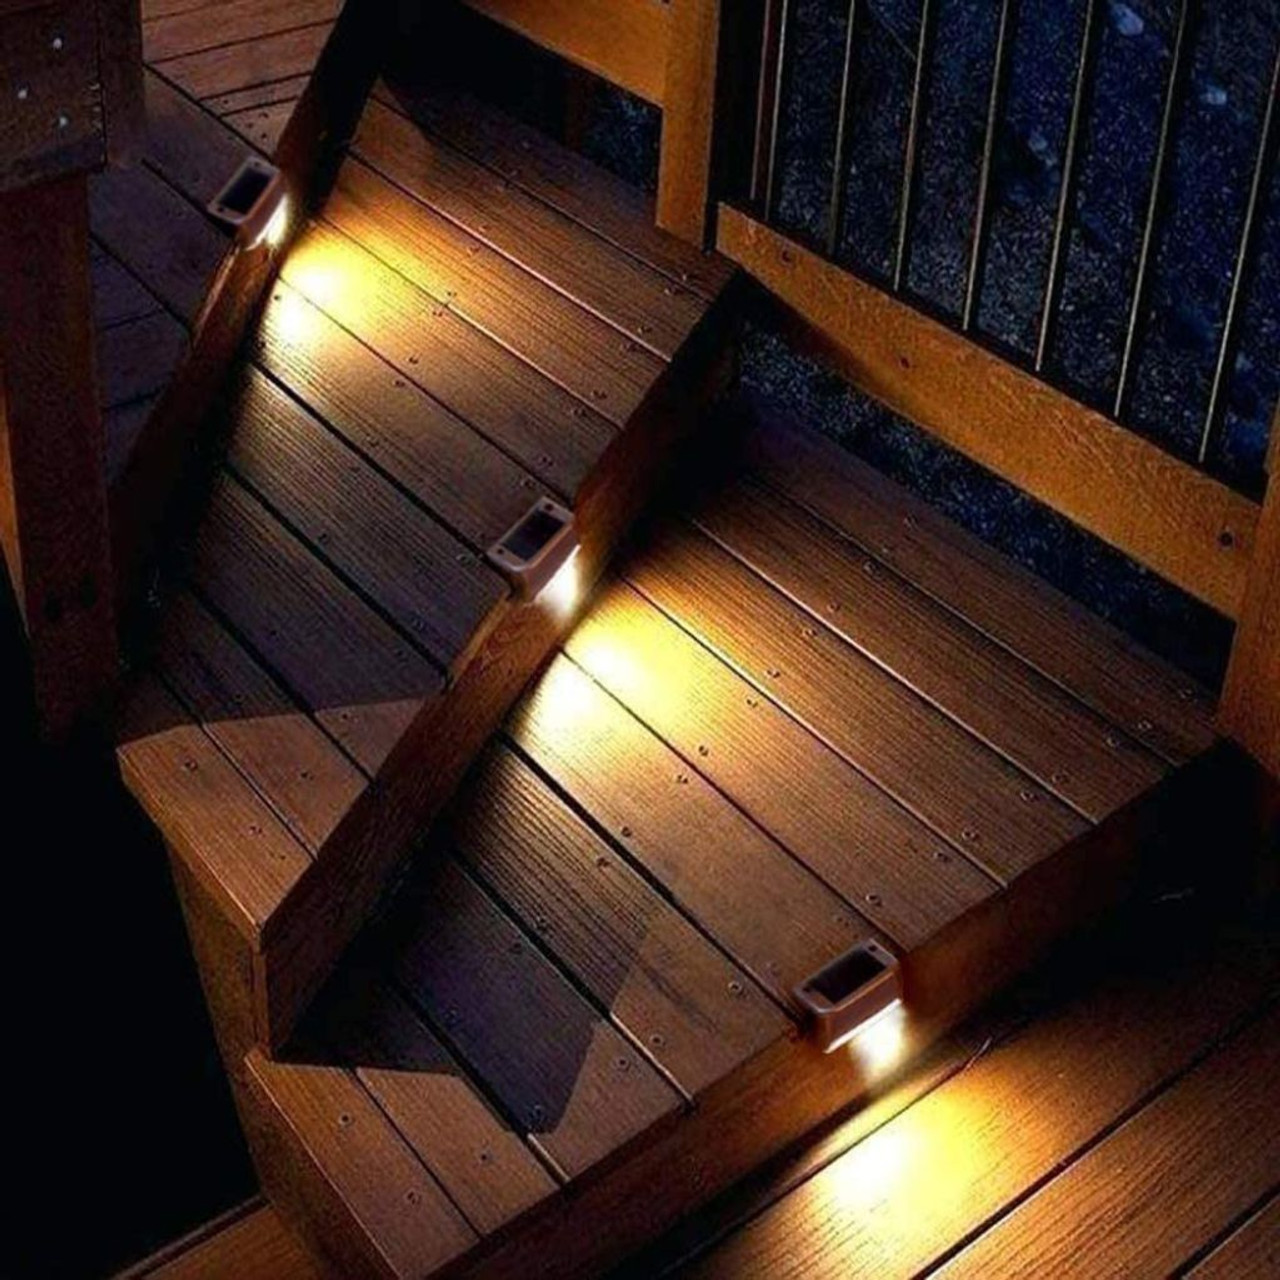 Solar Waterproof LED Deck Light (16-Pack) product image